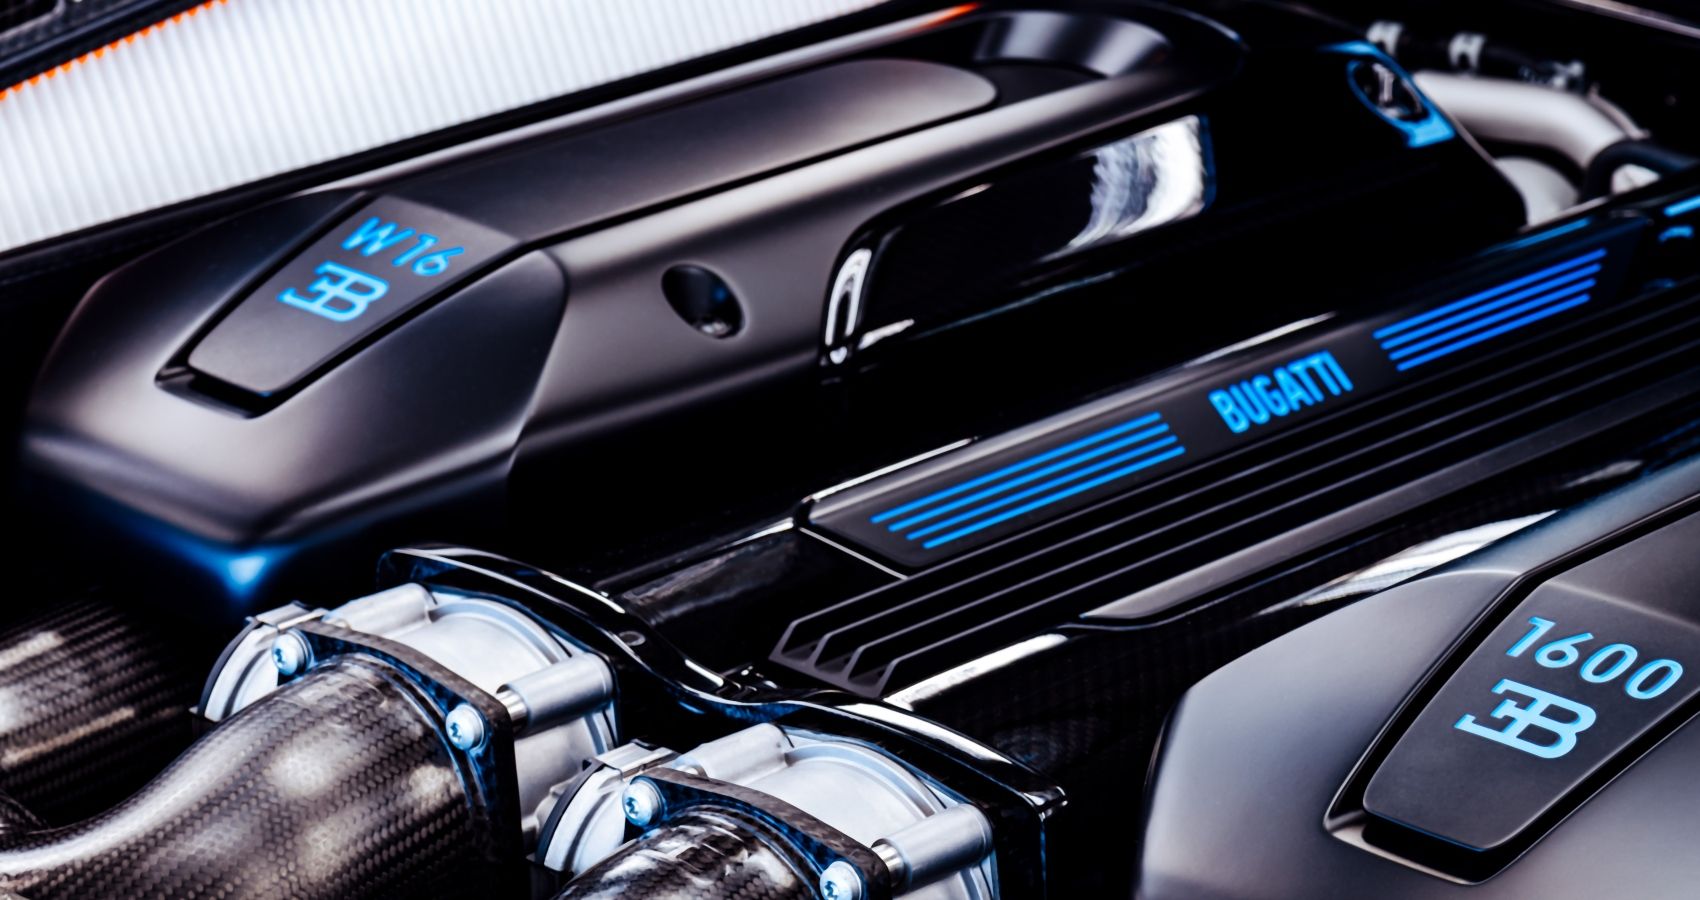 An overview of the Bugatti's 8.0-liter W16 engine